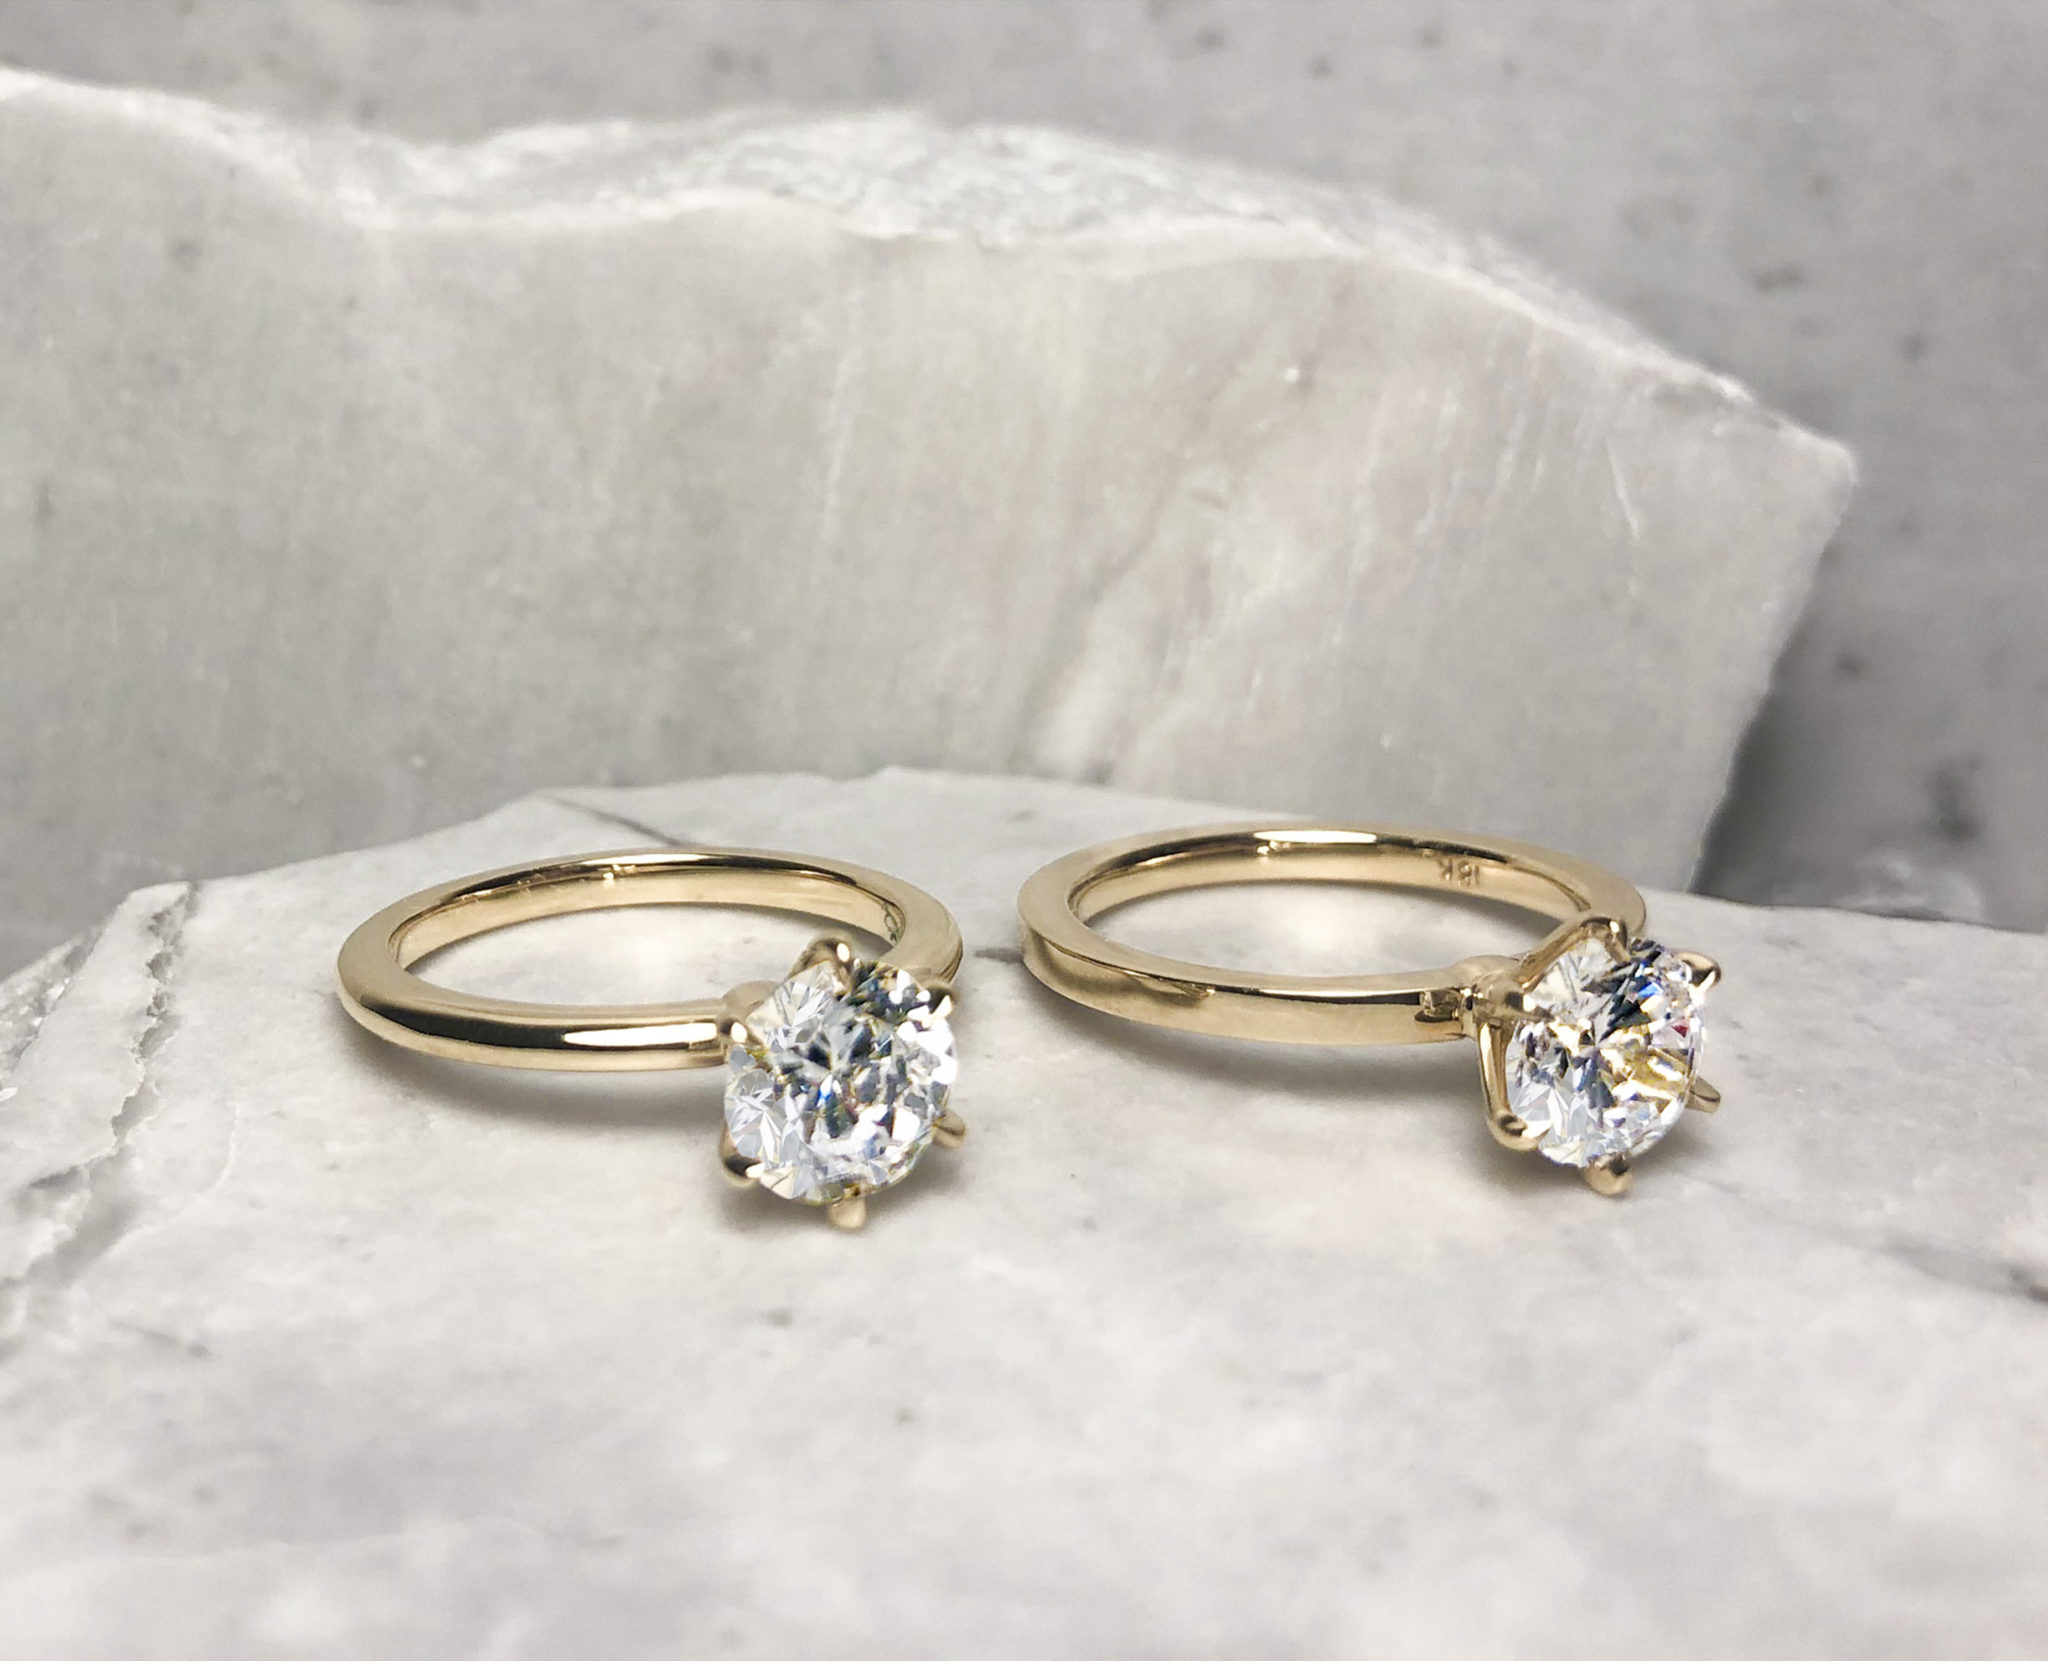 Australian Engagement Ring Shopping Guide - Style Guide The Lane